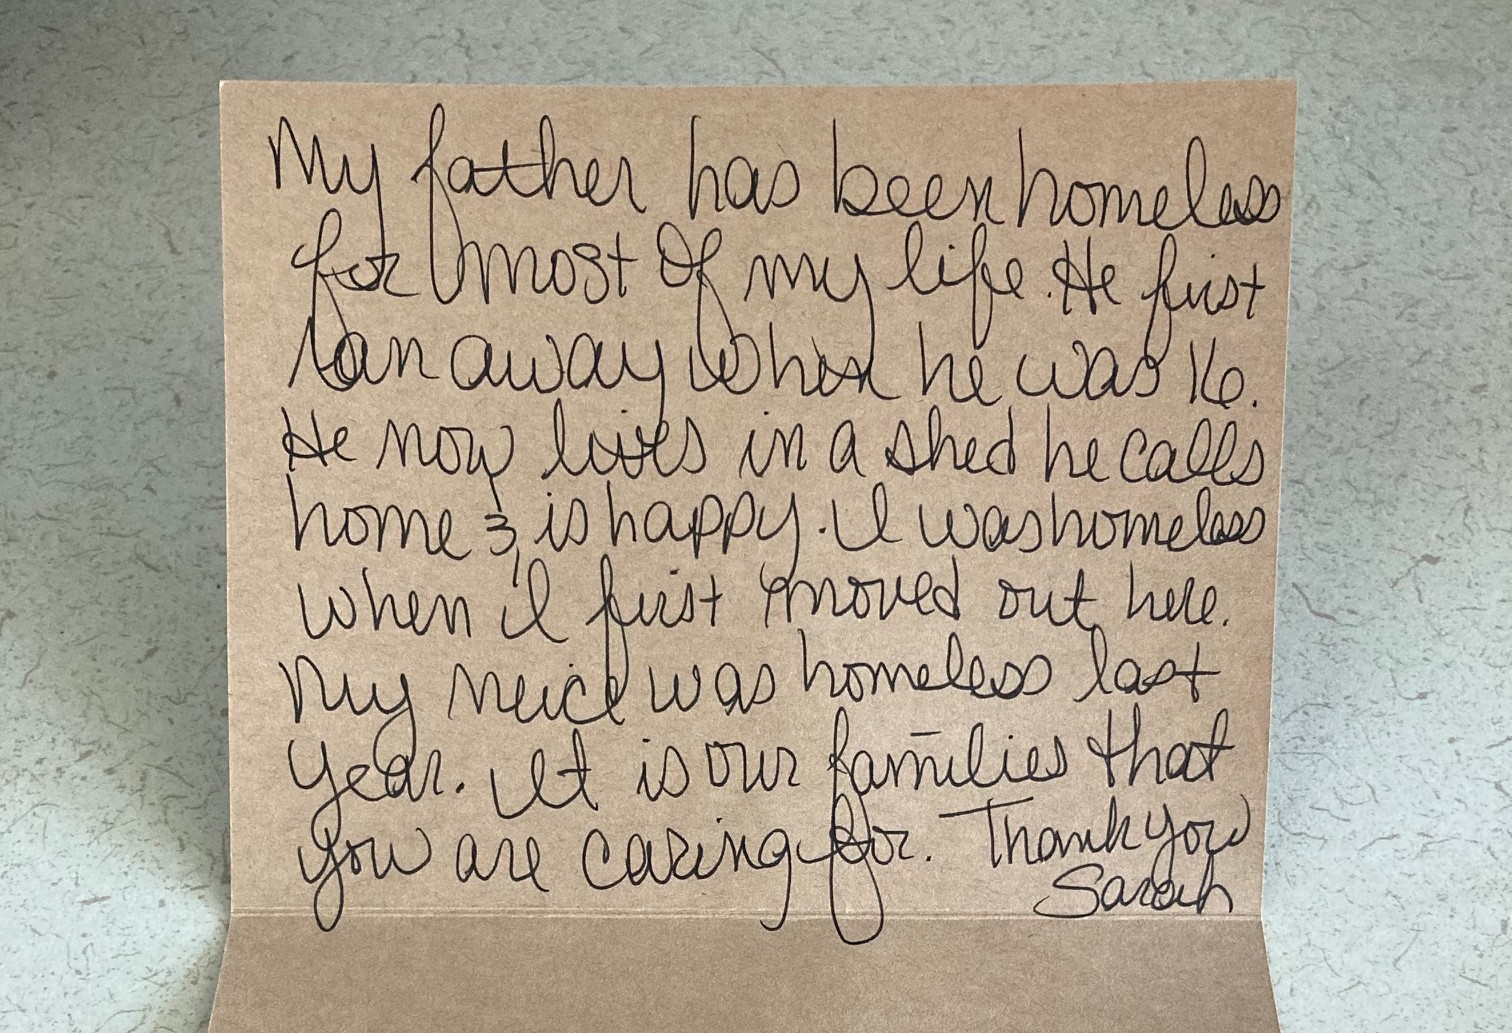 Small Acts of Kindness Help Homeless Survive - Blanchet House